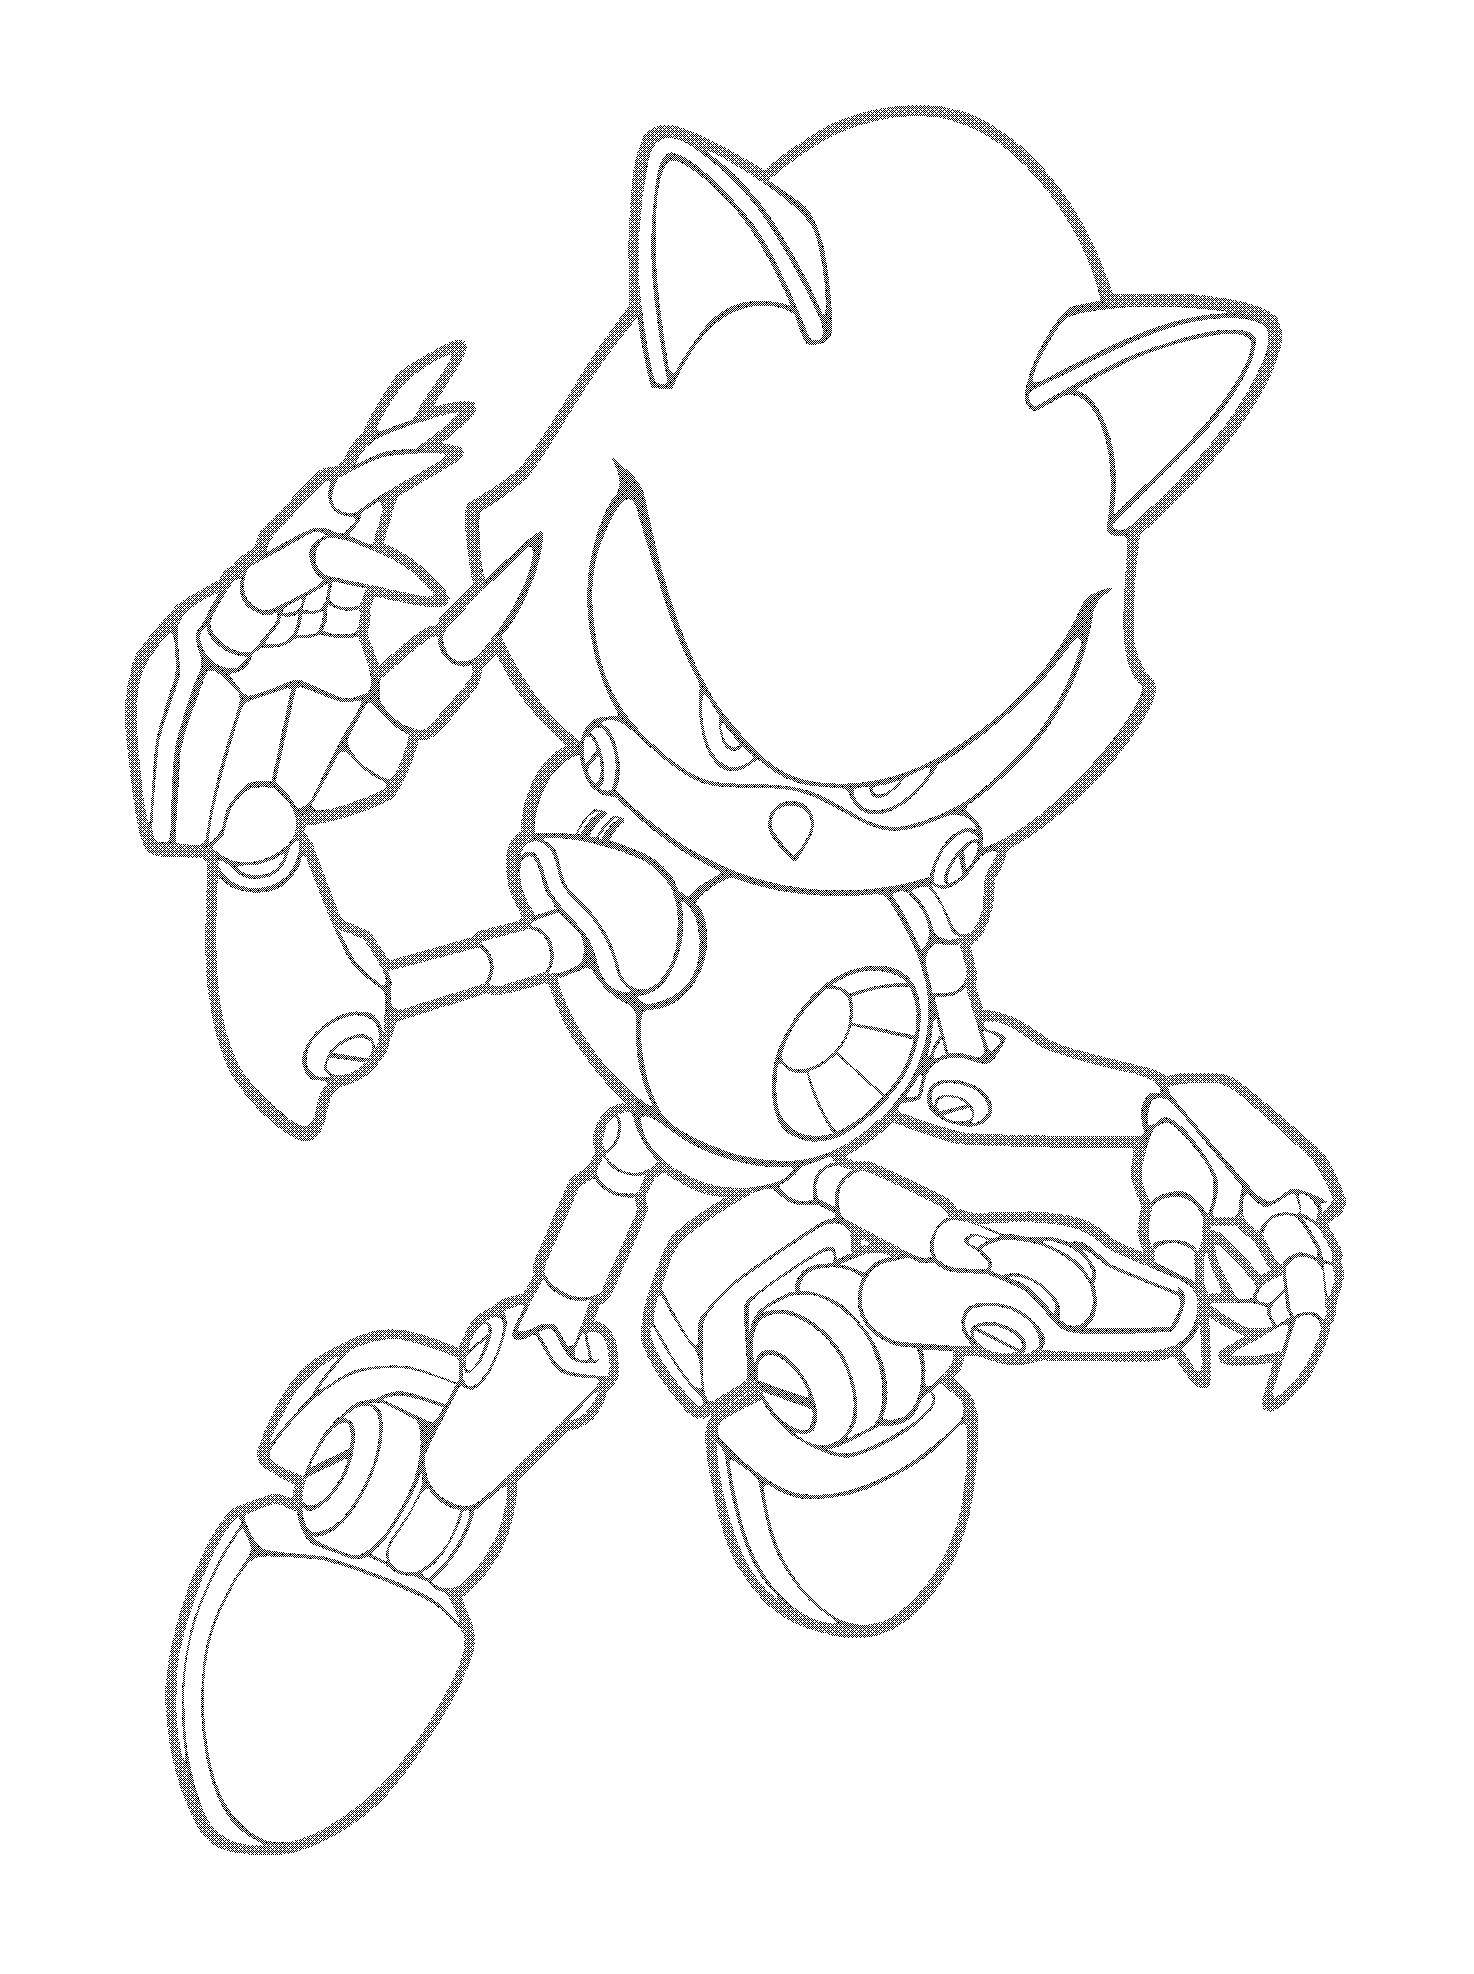 Coloring Robot from sonic. Category coloring pages sonic. Tags:  Cartoon character.